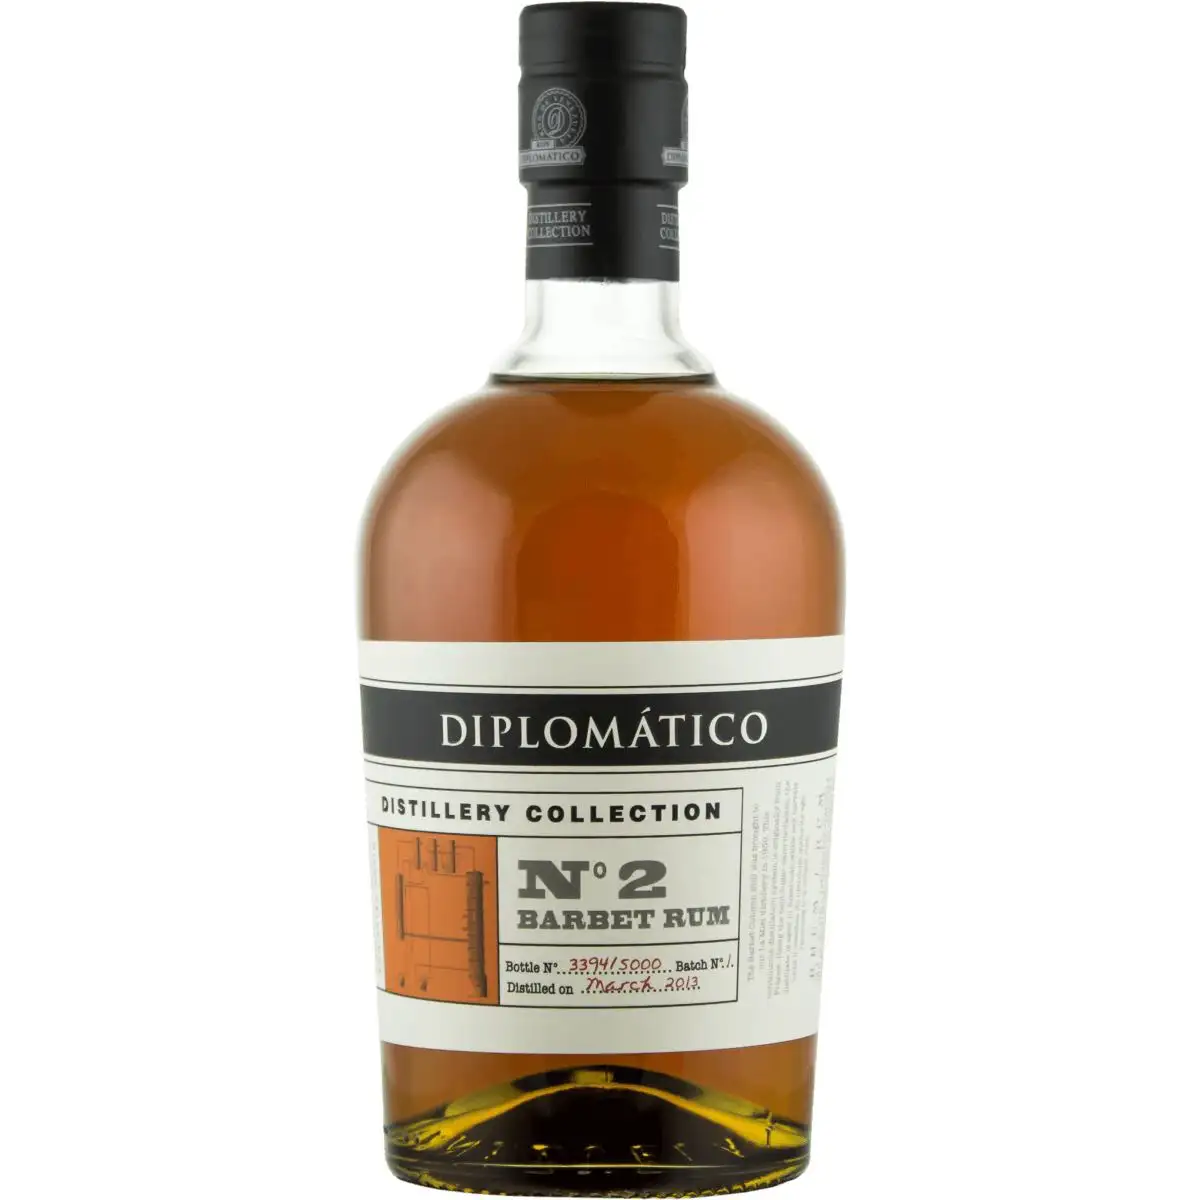 Image of the front of the bottle of the rum Diplomático / Botucal No. 2 Single Barbet Column Rum